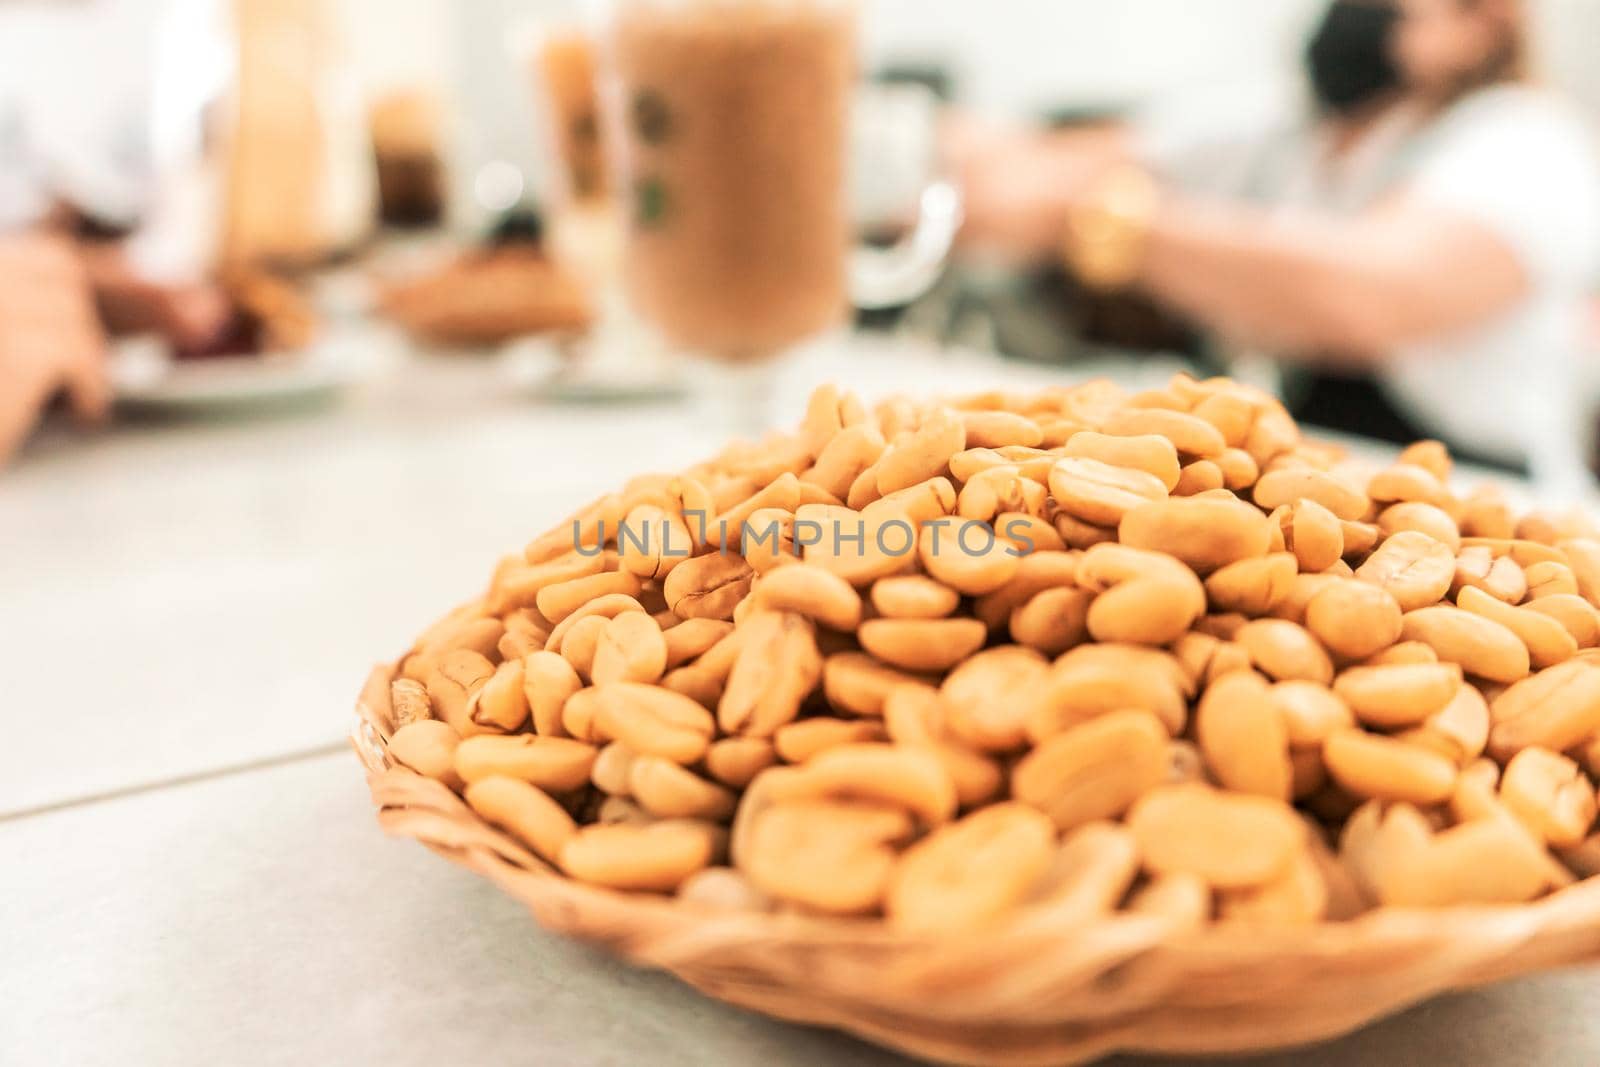 Roasted white coffee beans in a cafeteria with the background out of focus where the workers are and the drinks prepared at the bar